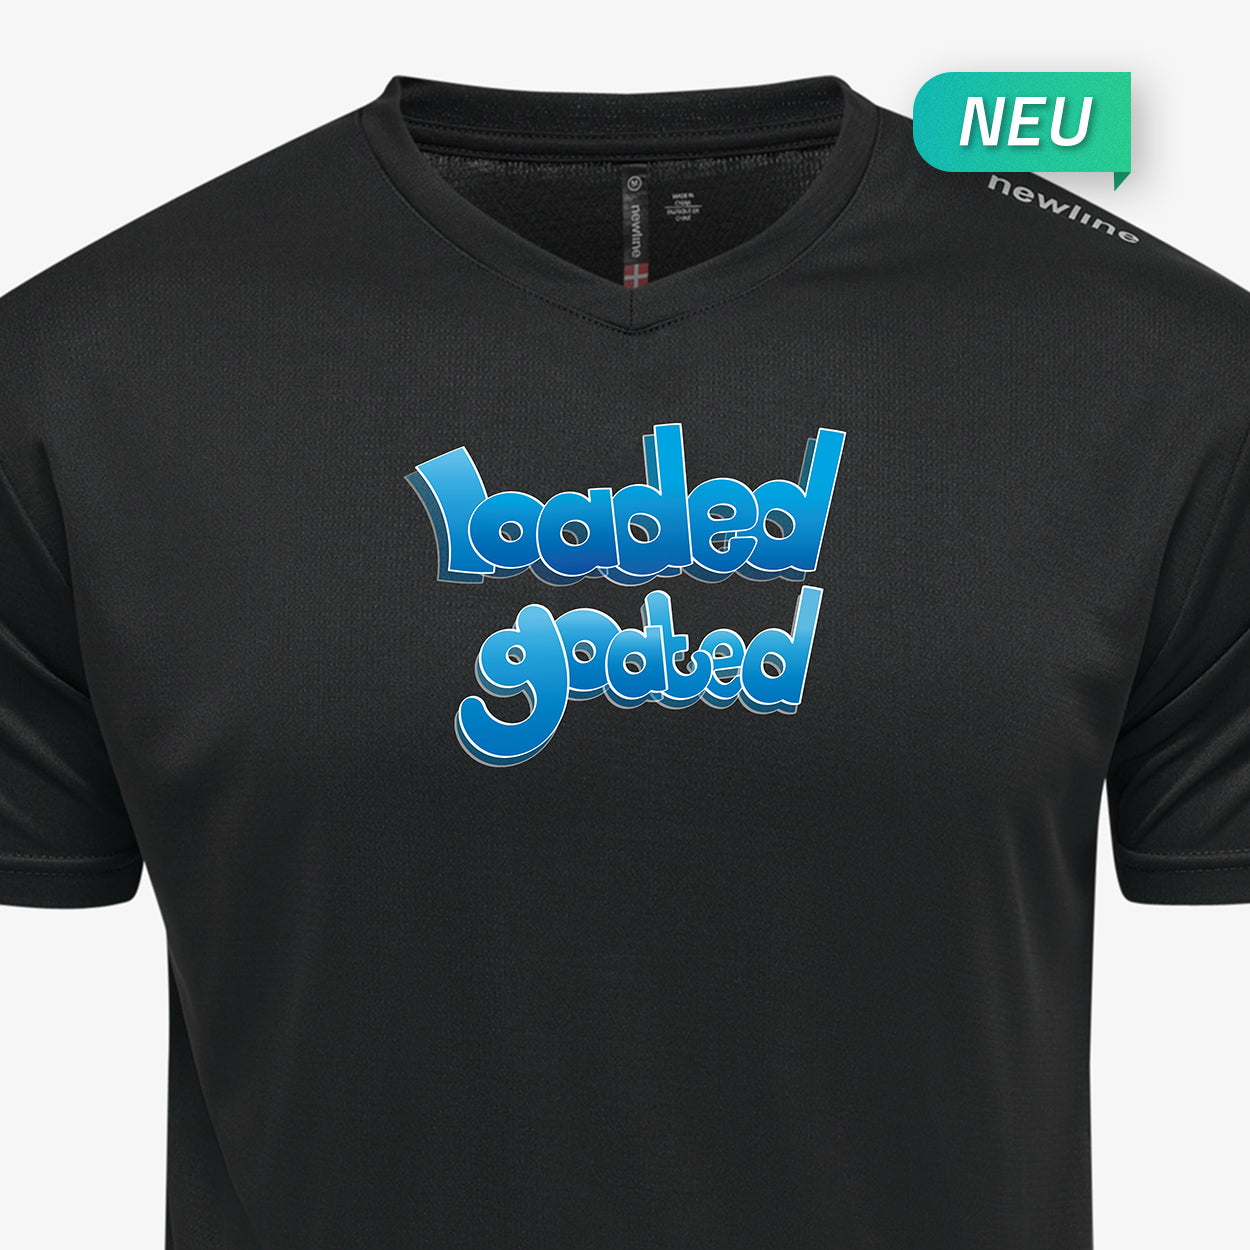 Loaded goated - T-Shirt